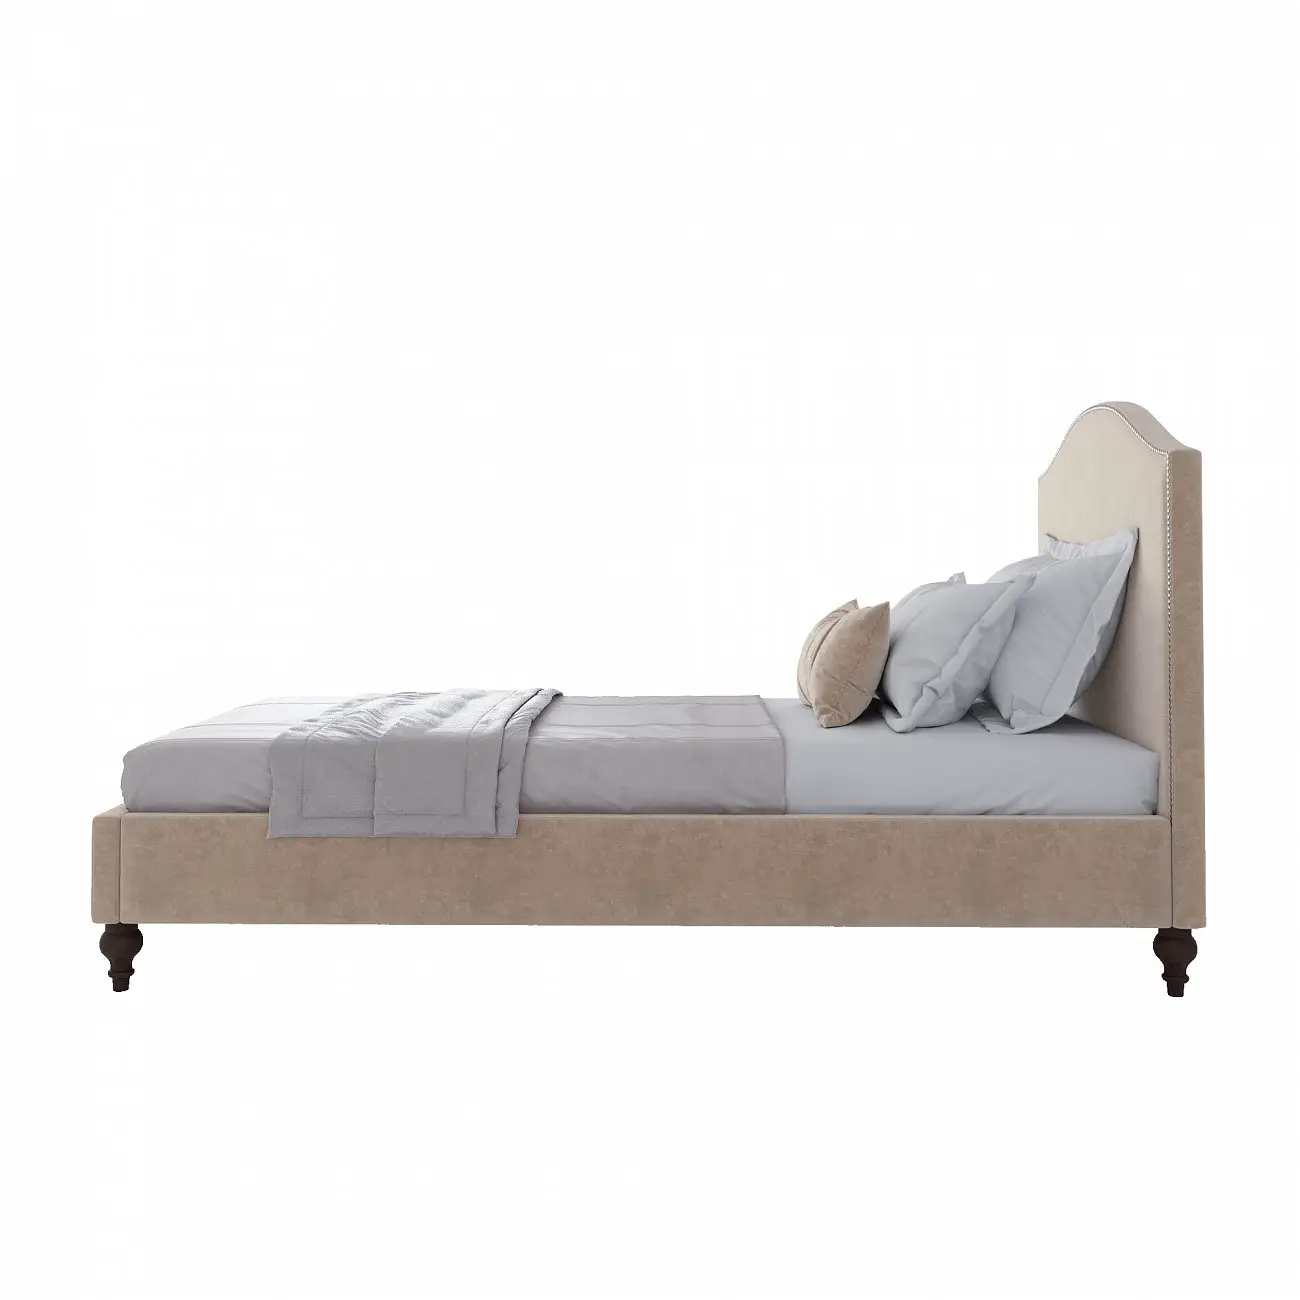 Single bed with upholstered headboard 90x200 cm beige-pink Fleurie